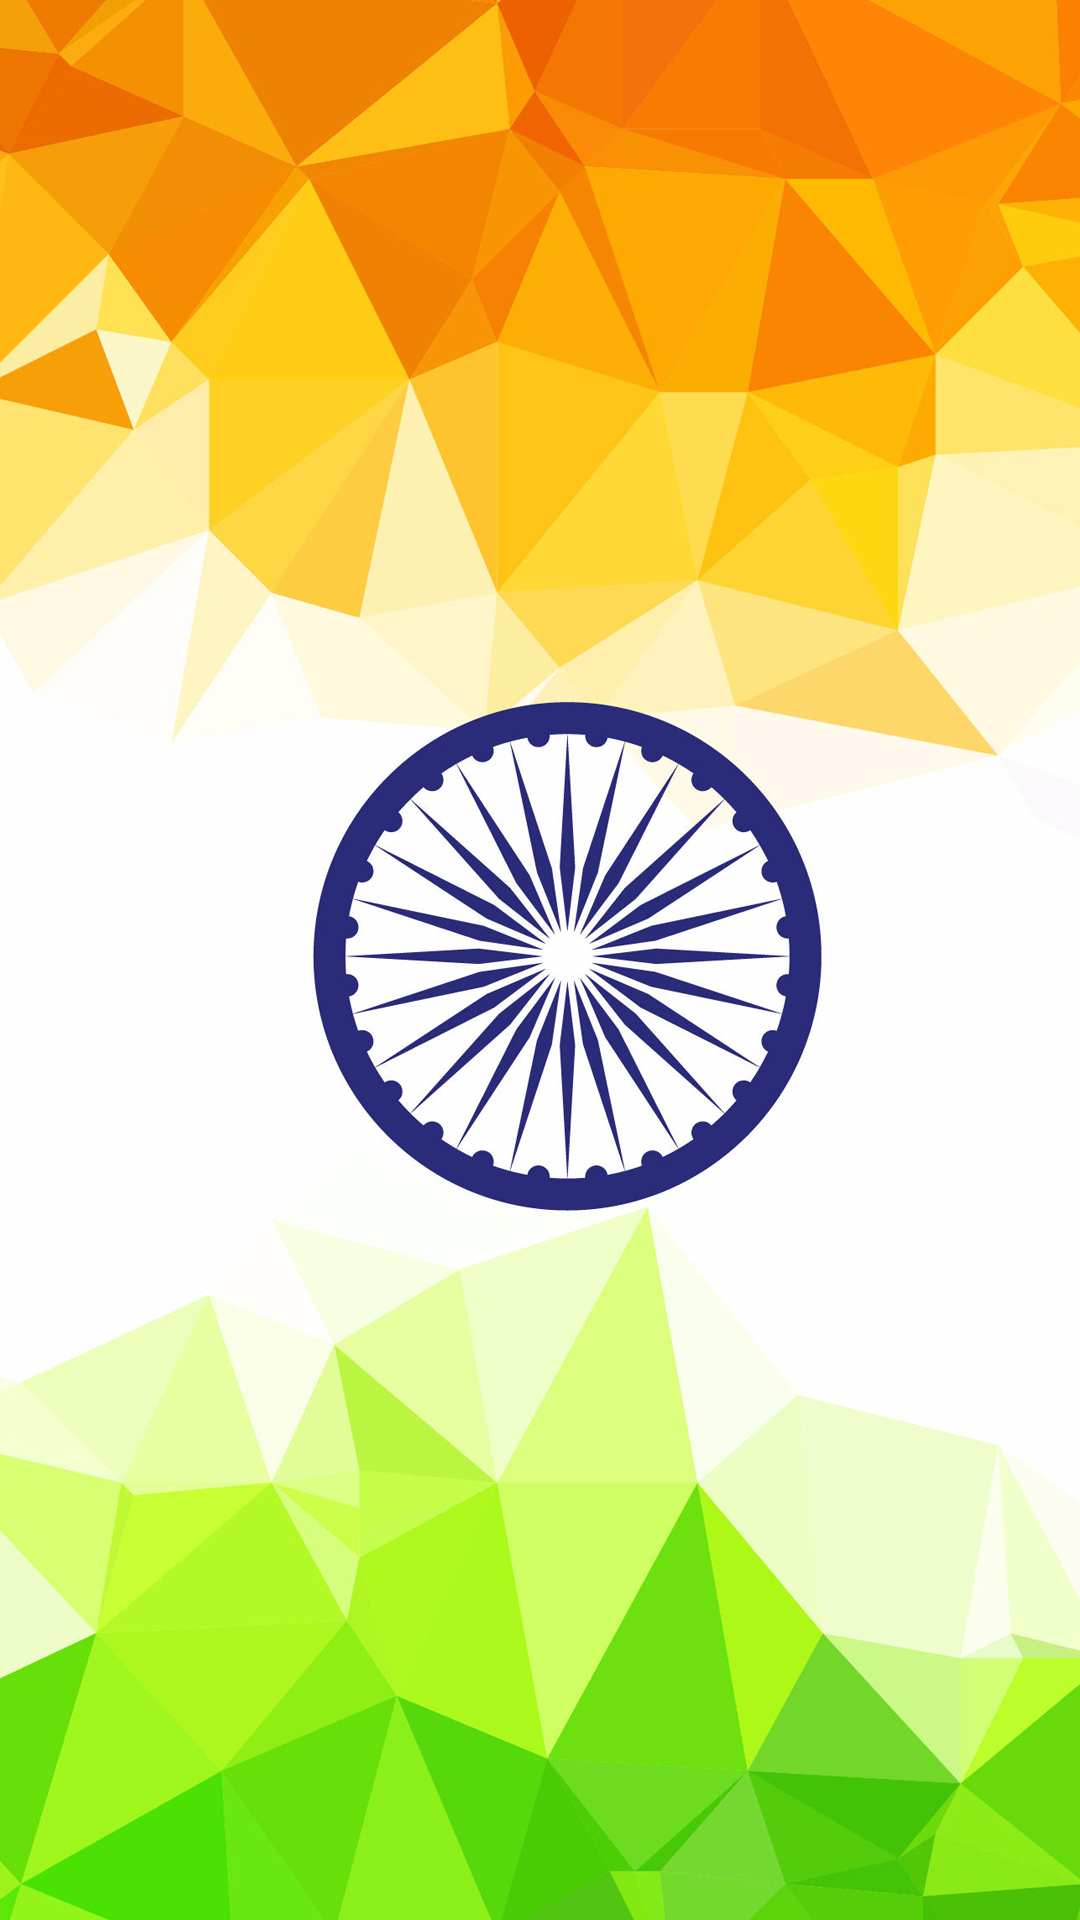 National Flag Images for WhatsApp - 02 of 10 - India Flag in HD 1080p ...